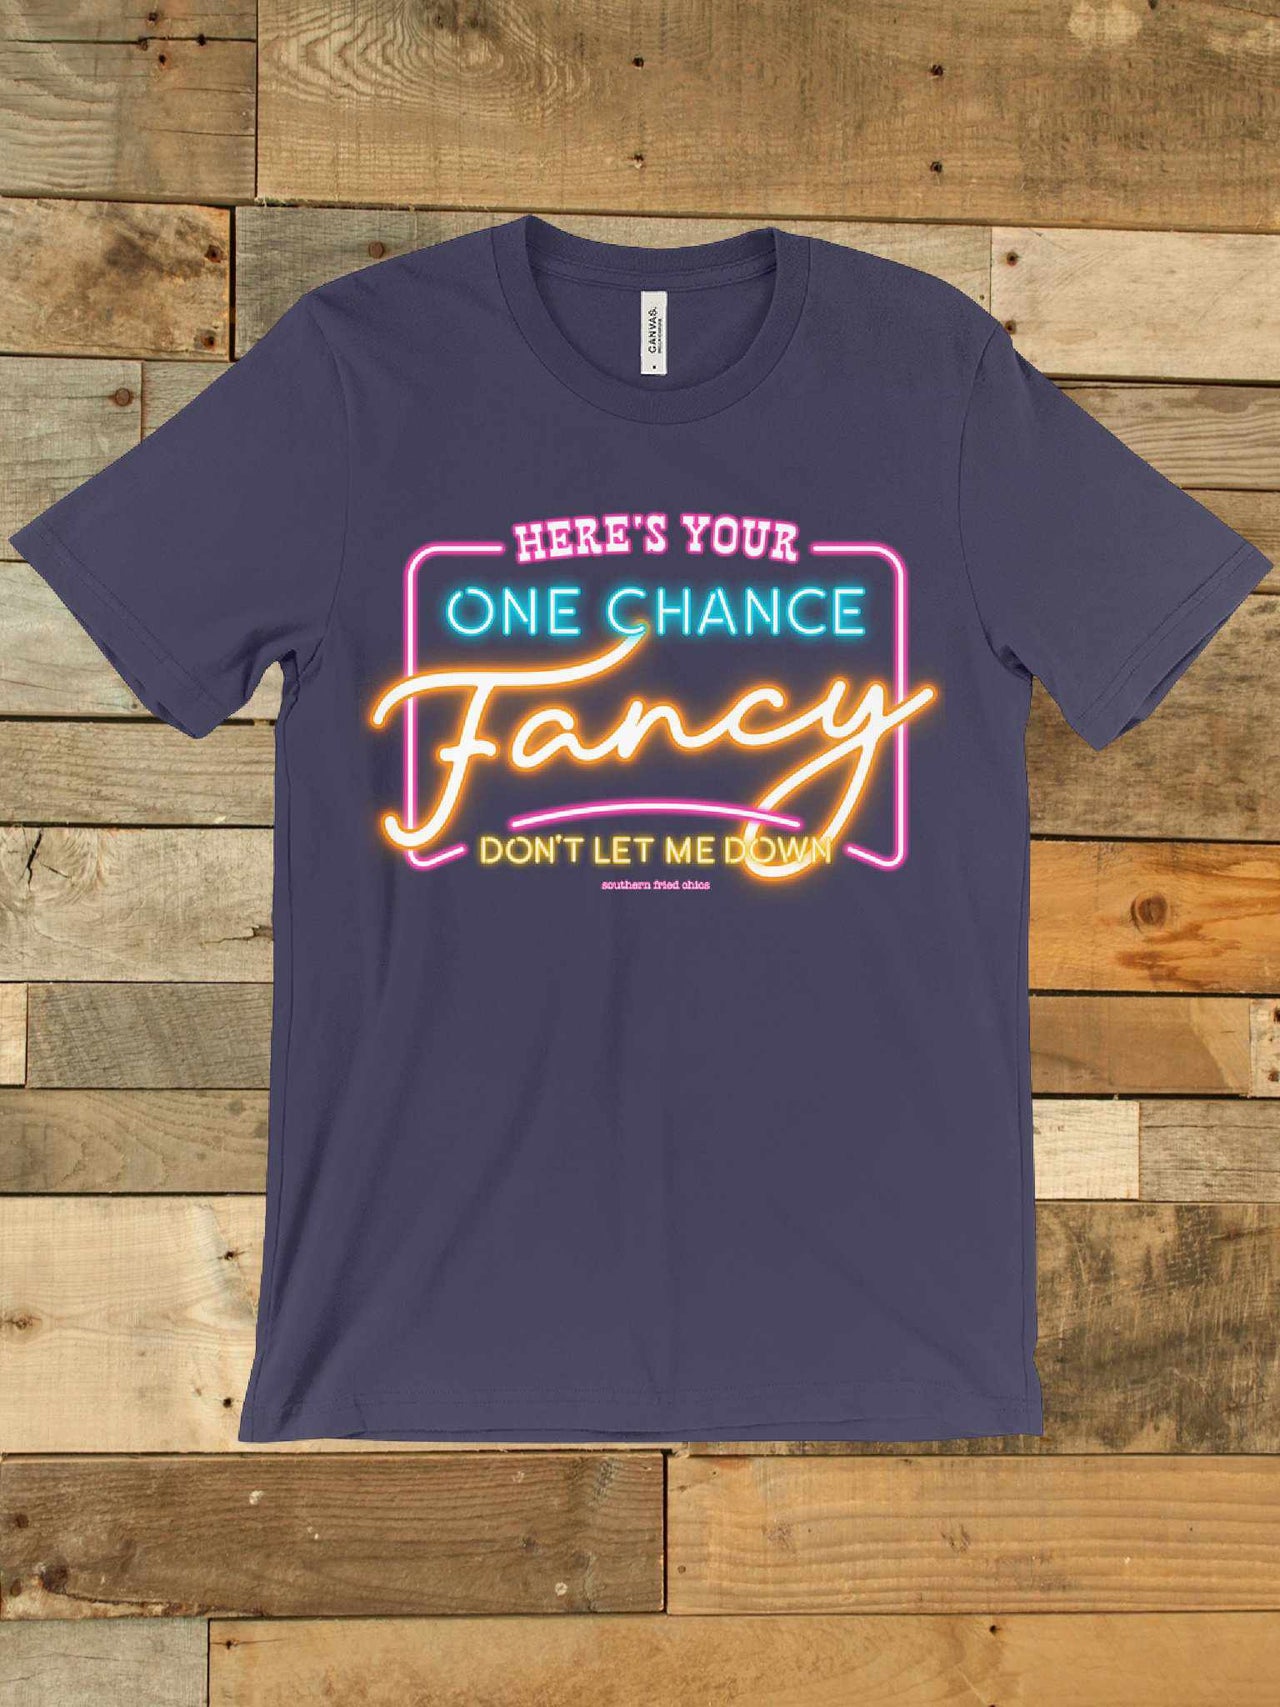 Fancy Tee-Southern Fried Chics